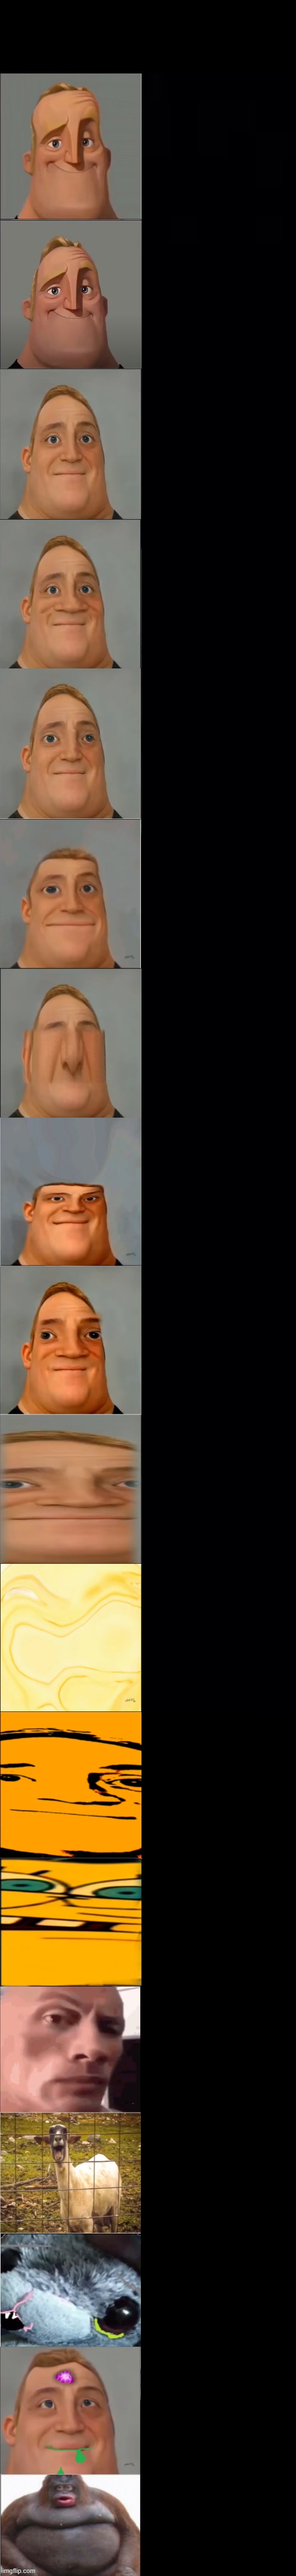 Mr Incredible Becoming An Idiot 2 Template | image tagged in mr incredible becoming uncanny 1st extension | made w/ Imgflip meme maker